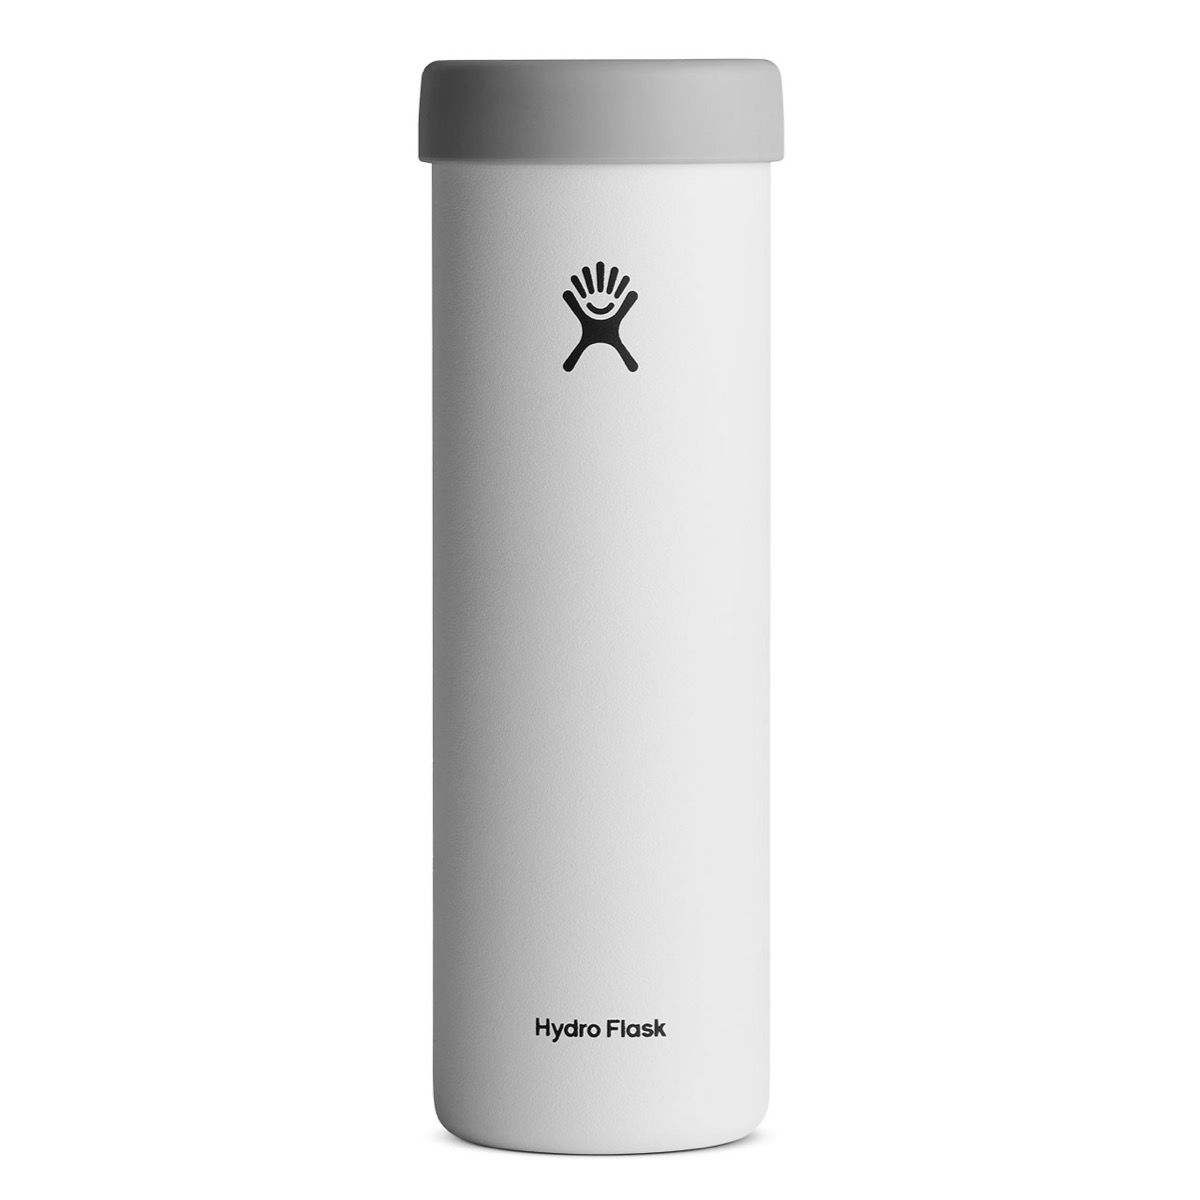 Hydro Flask Limited Edition Hawaii Cooler Cup